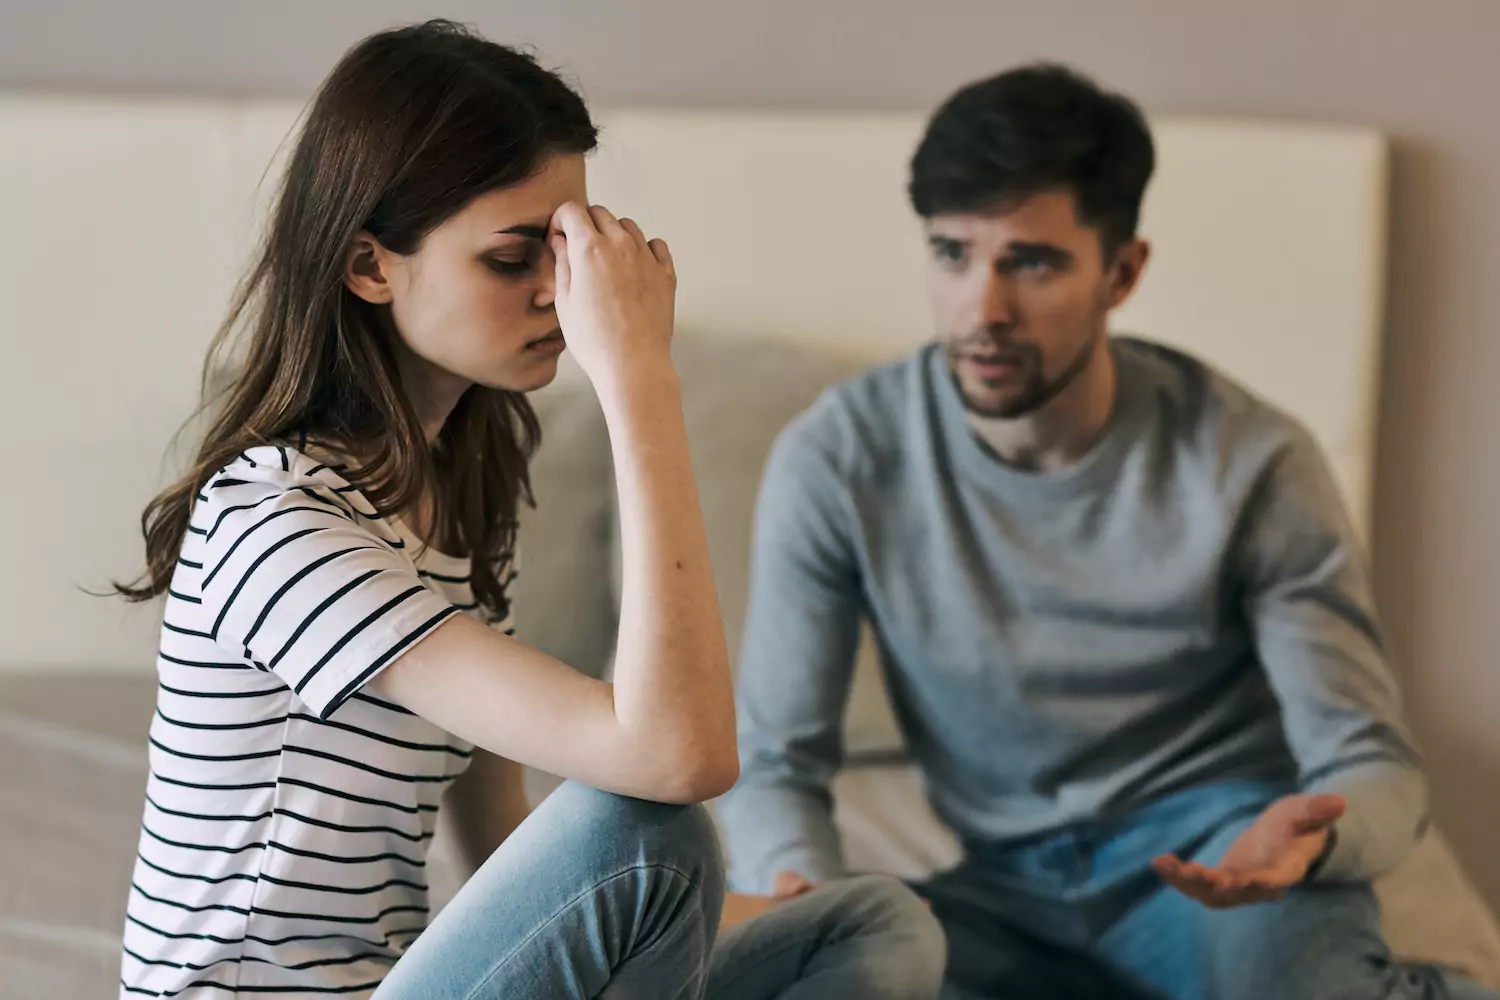 A woman sits on the edge of the bed with her head in her hand, as if stressed out. Her husband sits on the other end, trying to talk to her. Here are some tips to deal with past abortions in marriage.